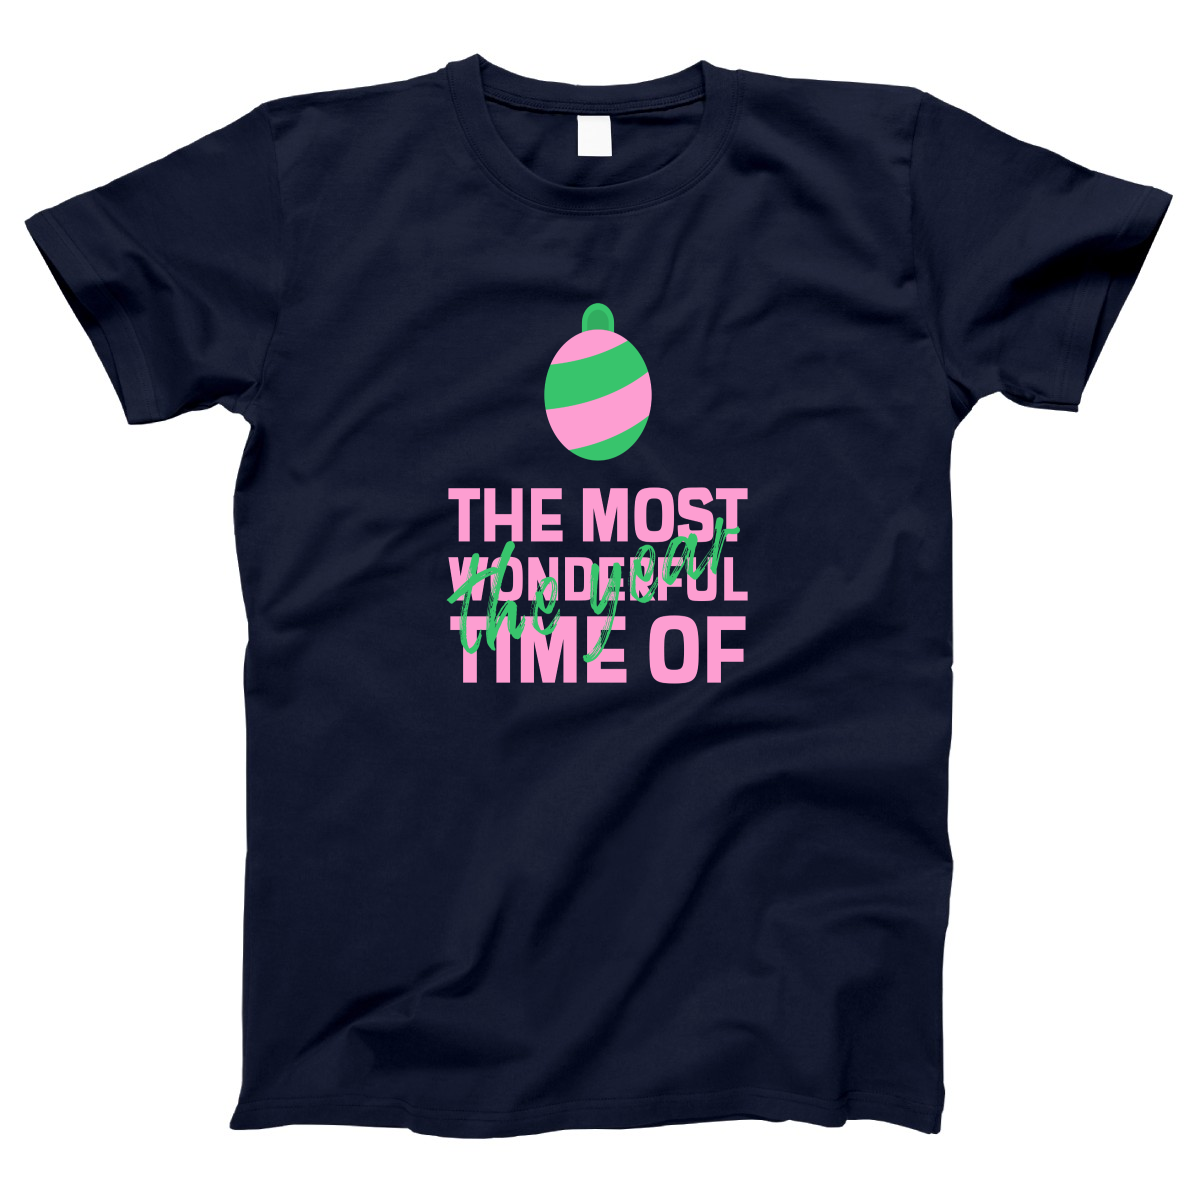 The Most Wonderful Time of the Year Women's T-shirt | Navy